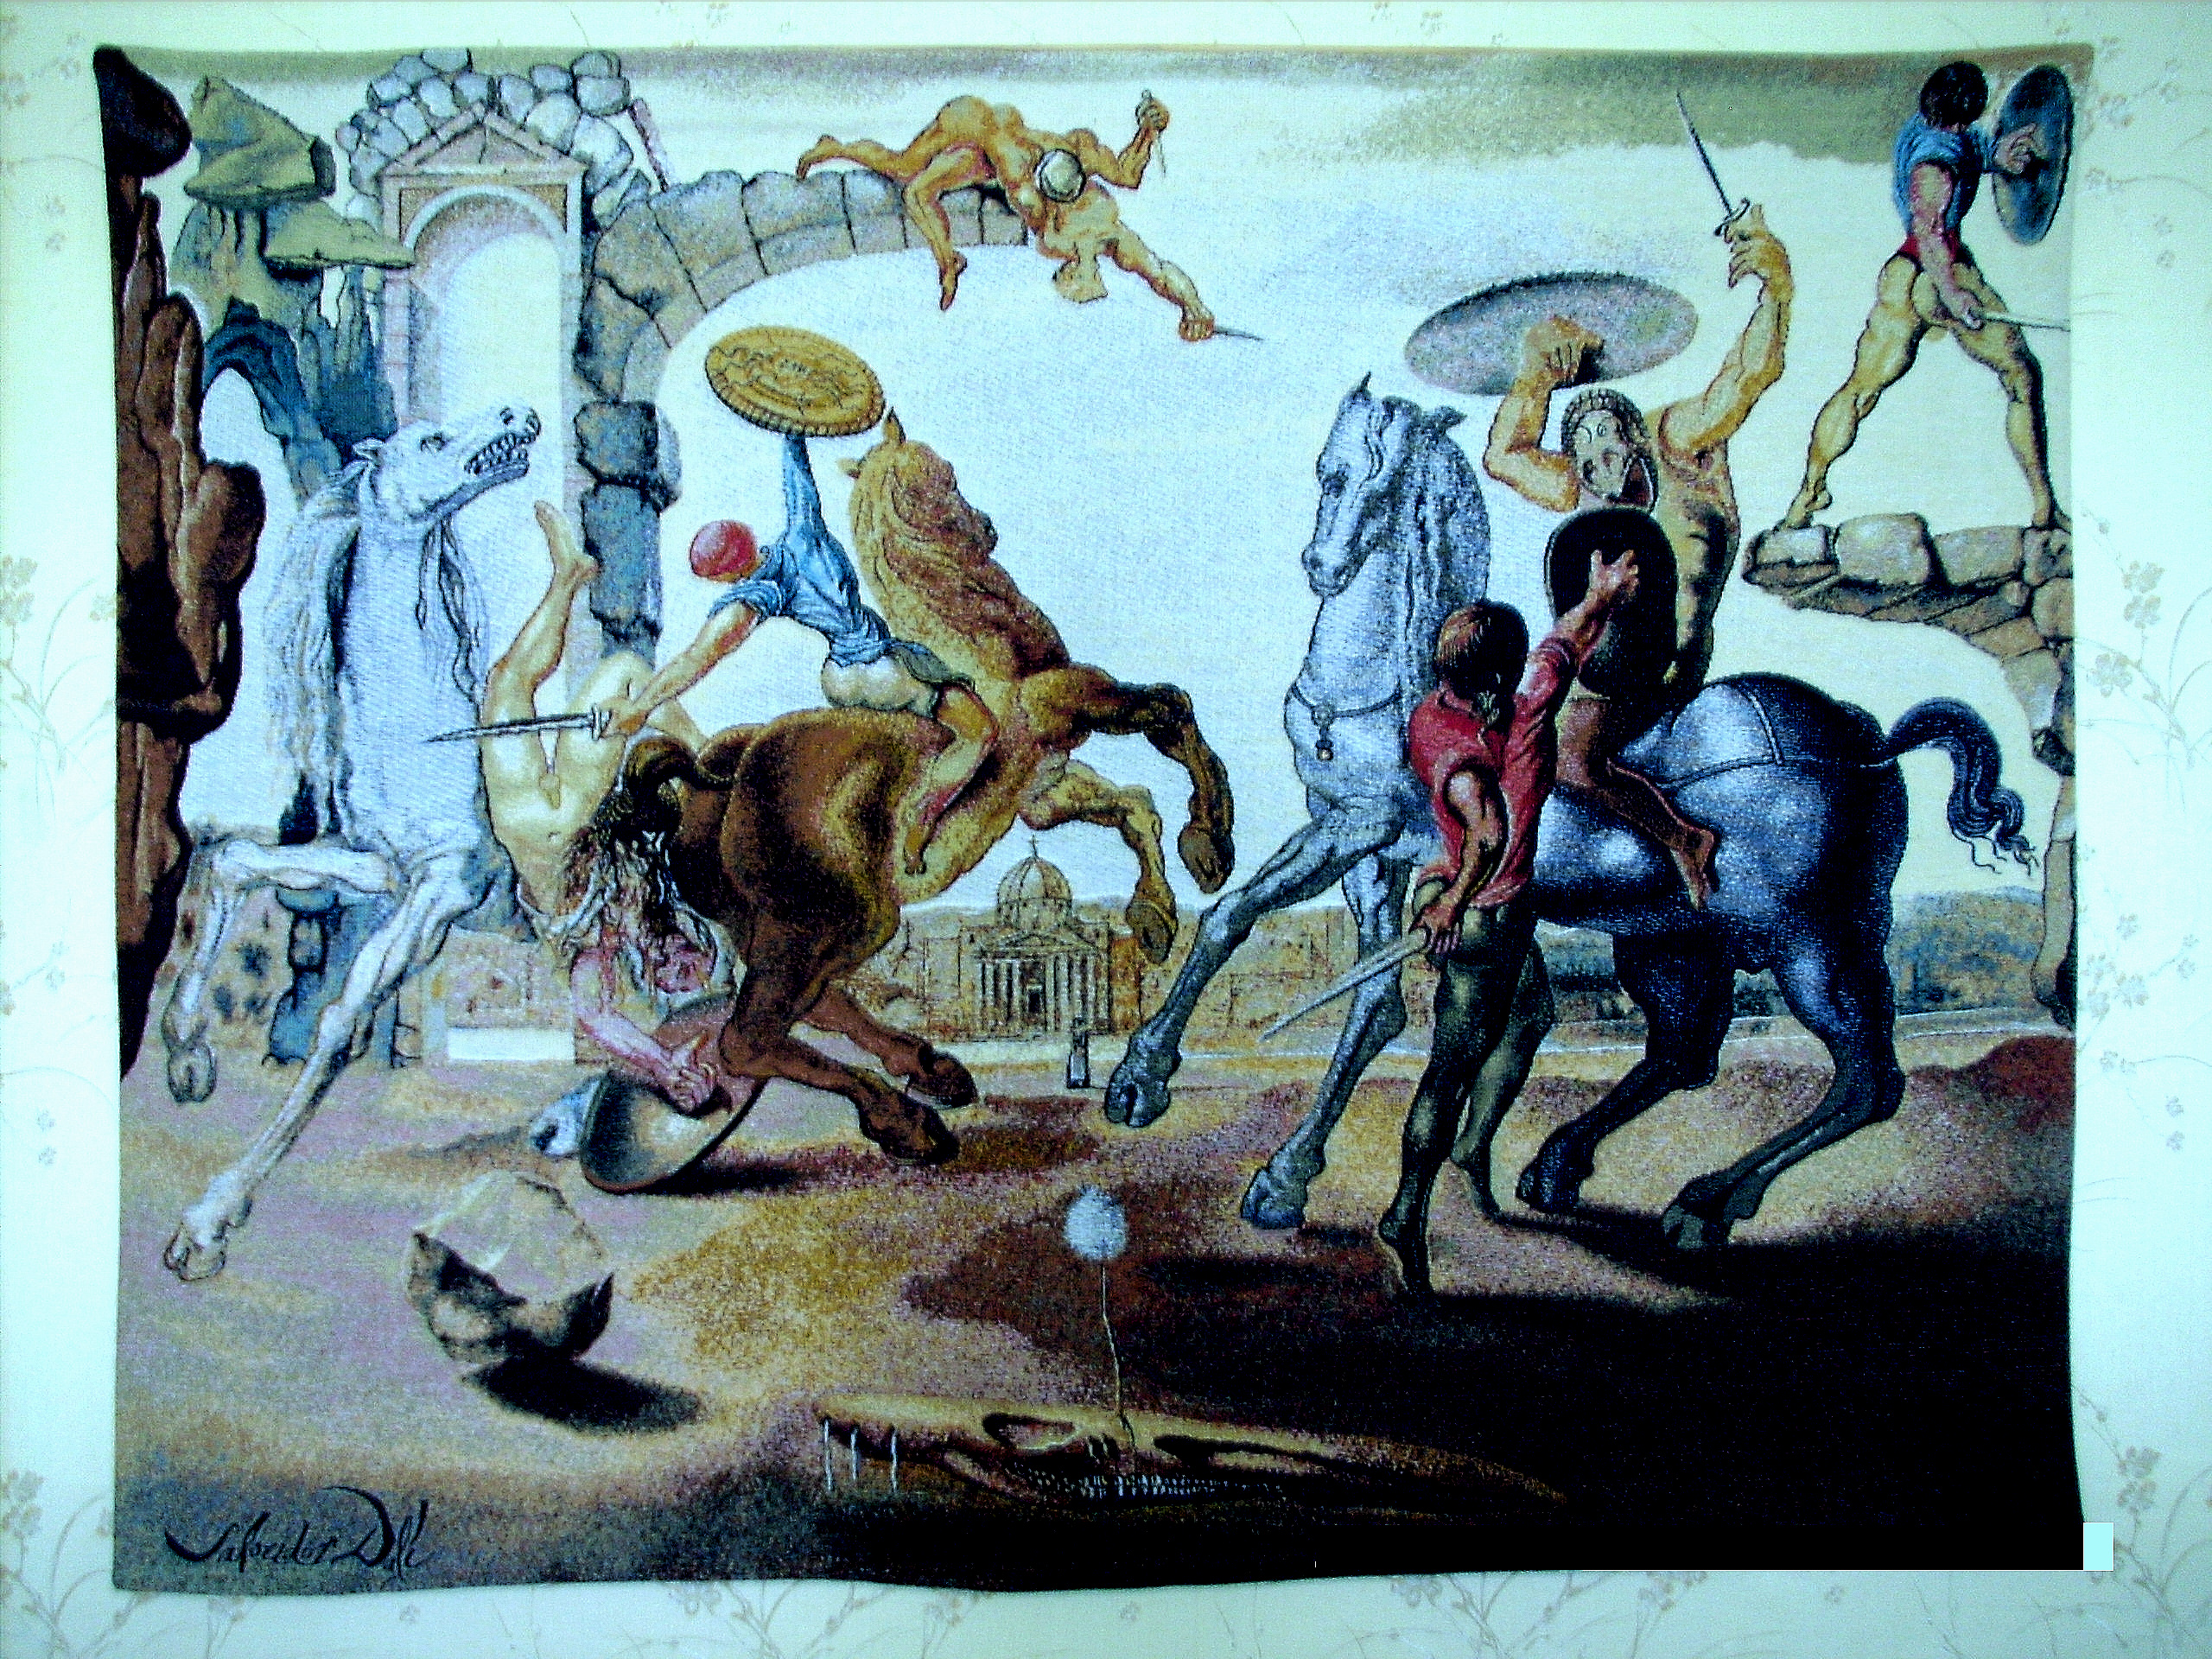 Battle Around A Dandelion (Tapestry) by Salvador Dali | Tapestry